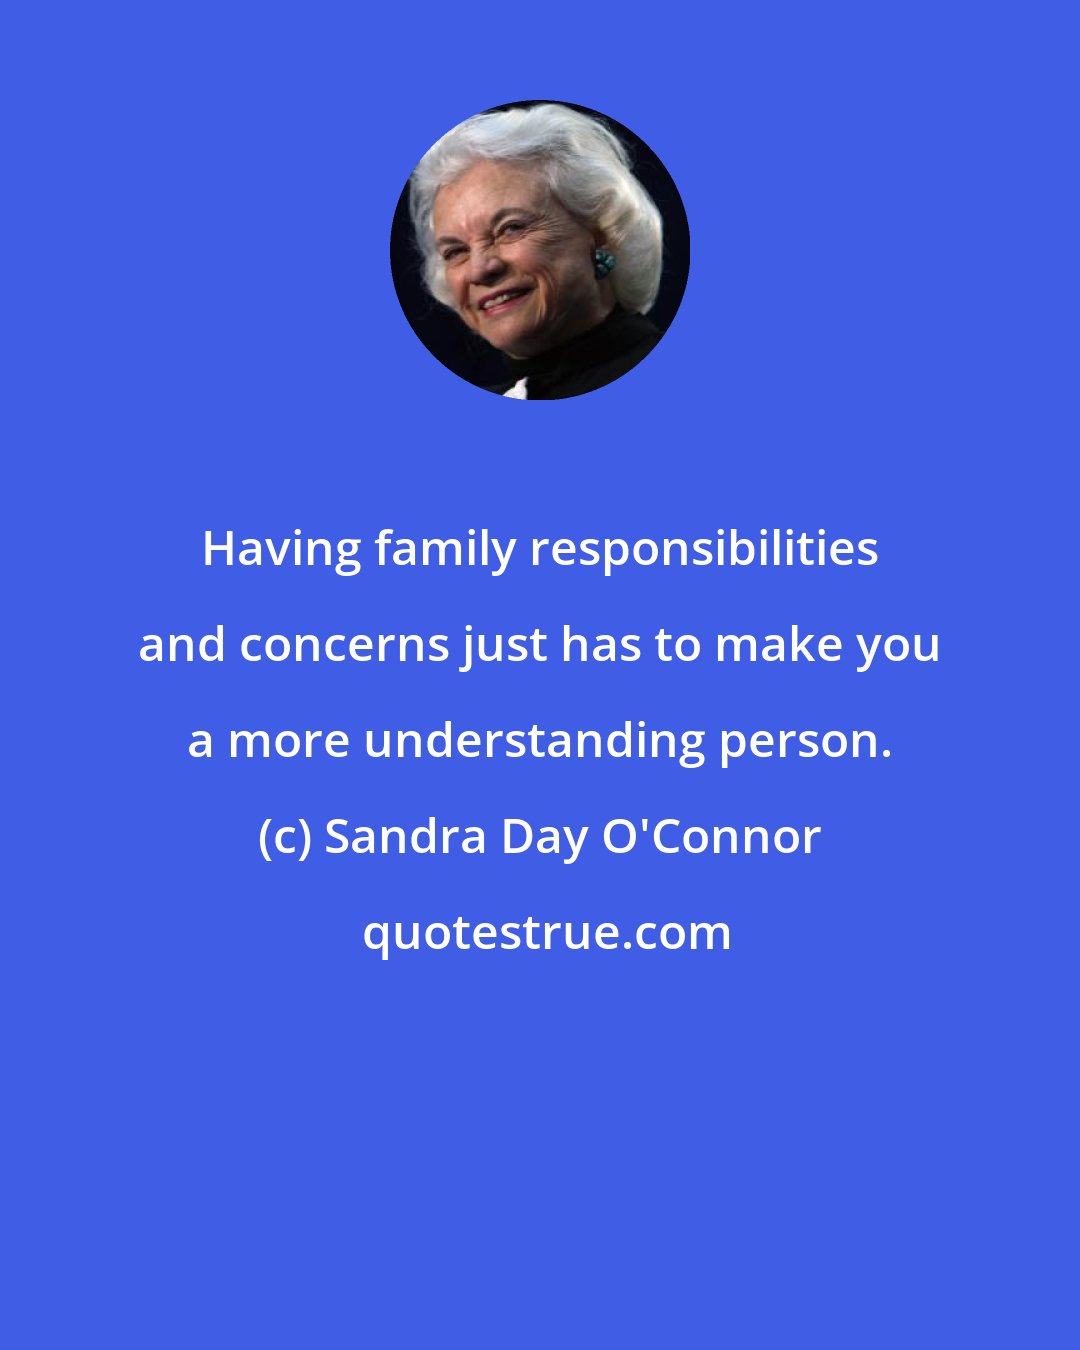 Sandra Day O'Connor: Having family responsibilities and concerns just has to make you a more understanding person.